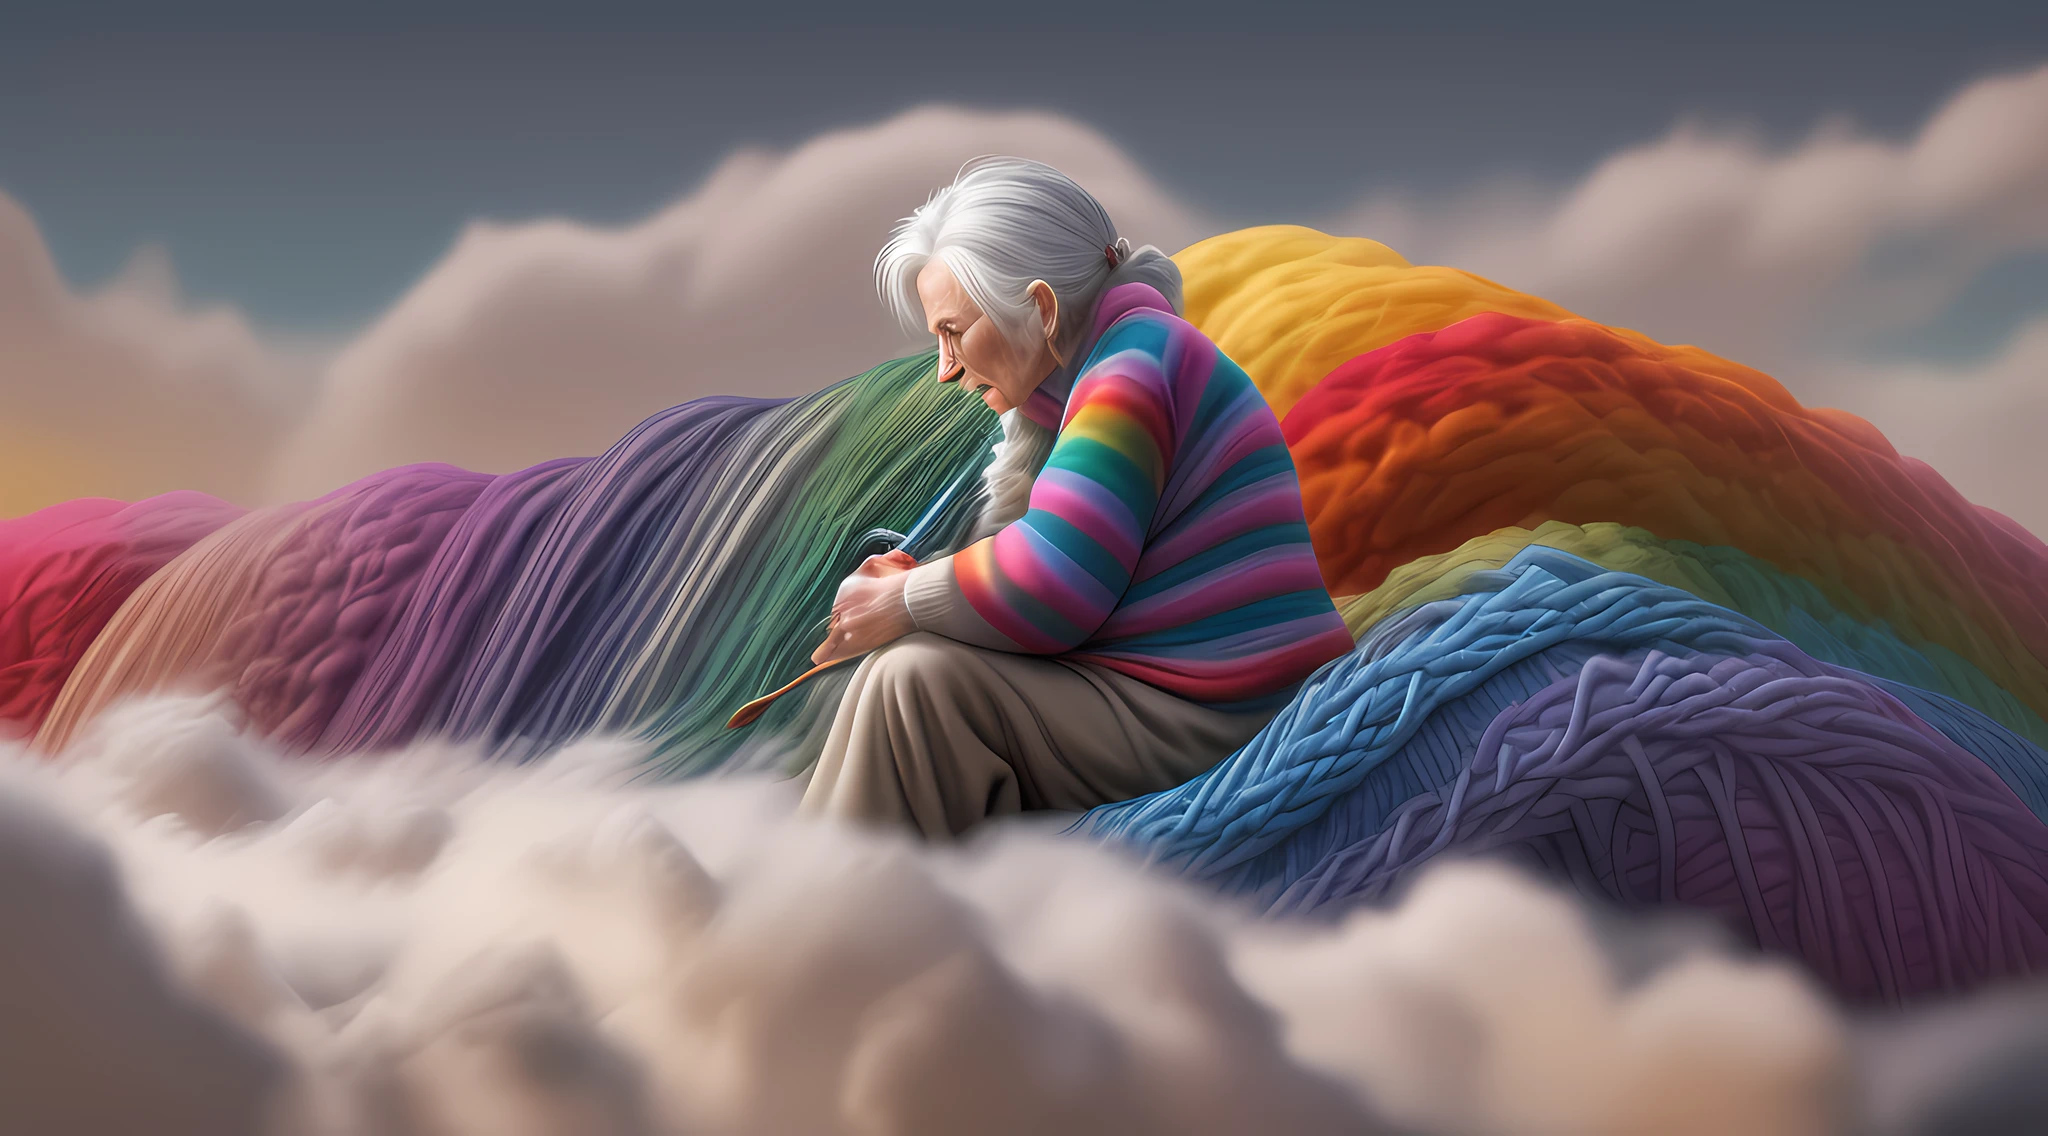 high details, best quality, 16k, [ultra detailed], masterpiece, best quality, dynamic angle, ultra wide shot, RAW, photorealistic, fantasy art, realistic art, a picture of a old woman sitting in heaven knitting the rainbow, an (old human woman: 1.2) , dynamic hair, dynamic clothes, sitting on a cloud knitting the rainbow, full colored, (perfect spectrum: 1.3),( vibrant work: 1.4)  vibrant shades of red, orange, yellow, green, blue, indigo, violet of knitting, perfect colors, the rainbow falls into the sky from the old woman who knits, 16k, ultra detailed, masterpiece, best quality, ultra detailed, full body, ultra wide shot, photorealistic, 3d rendering